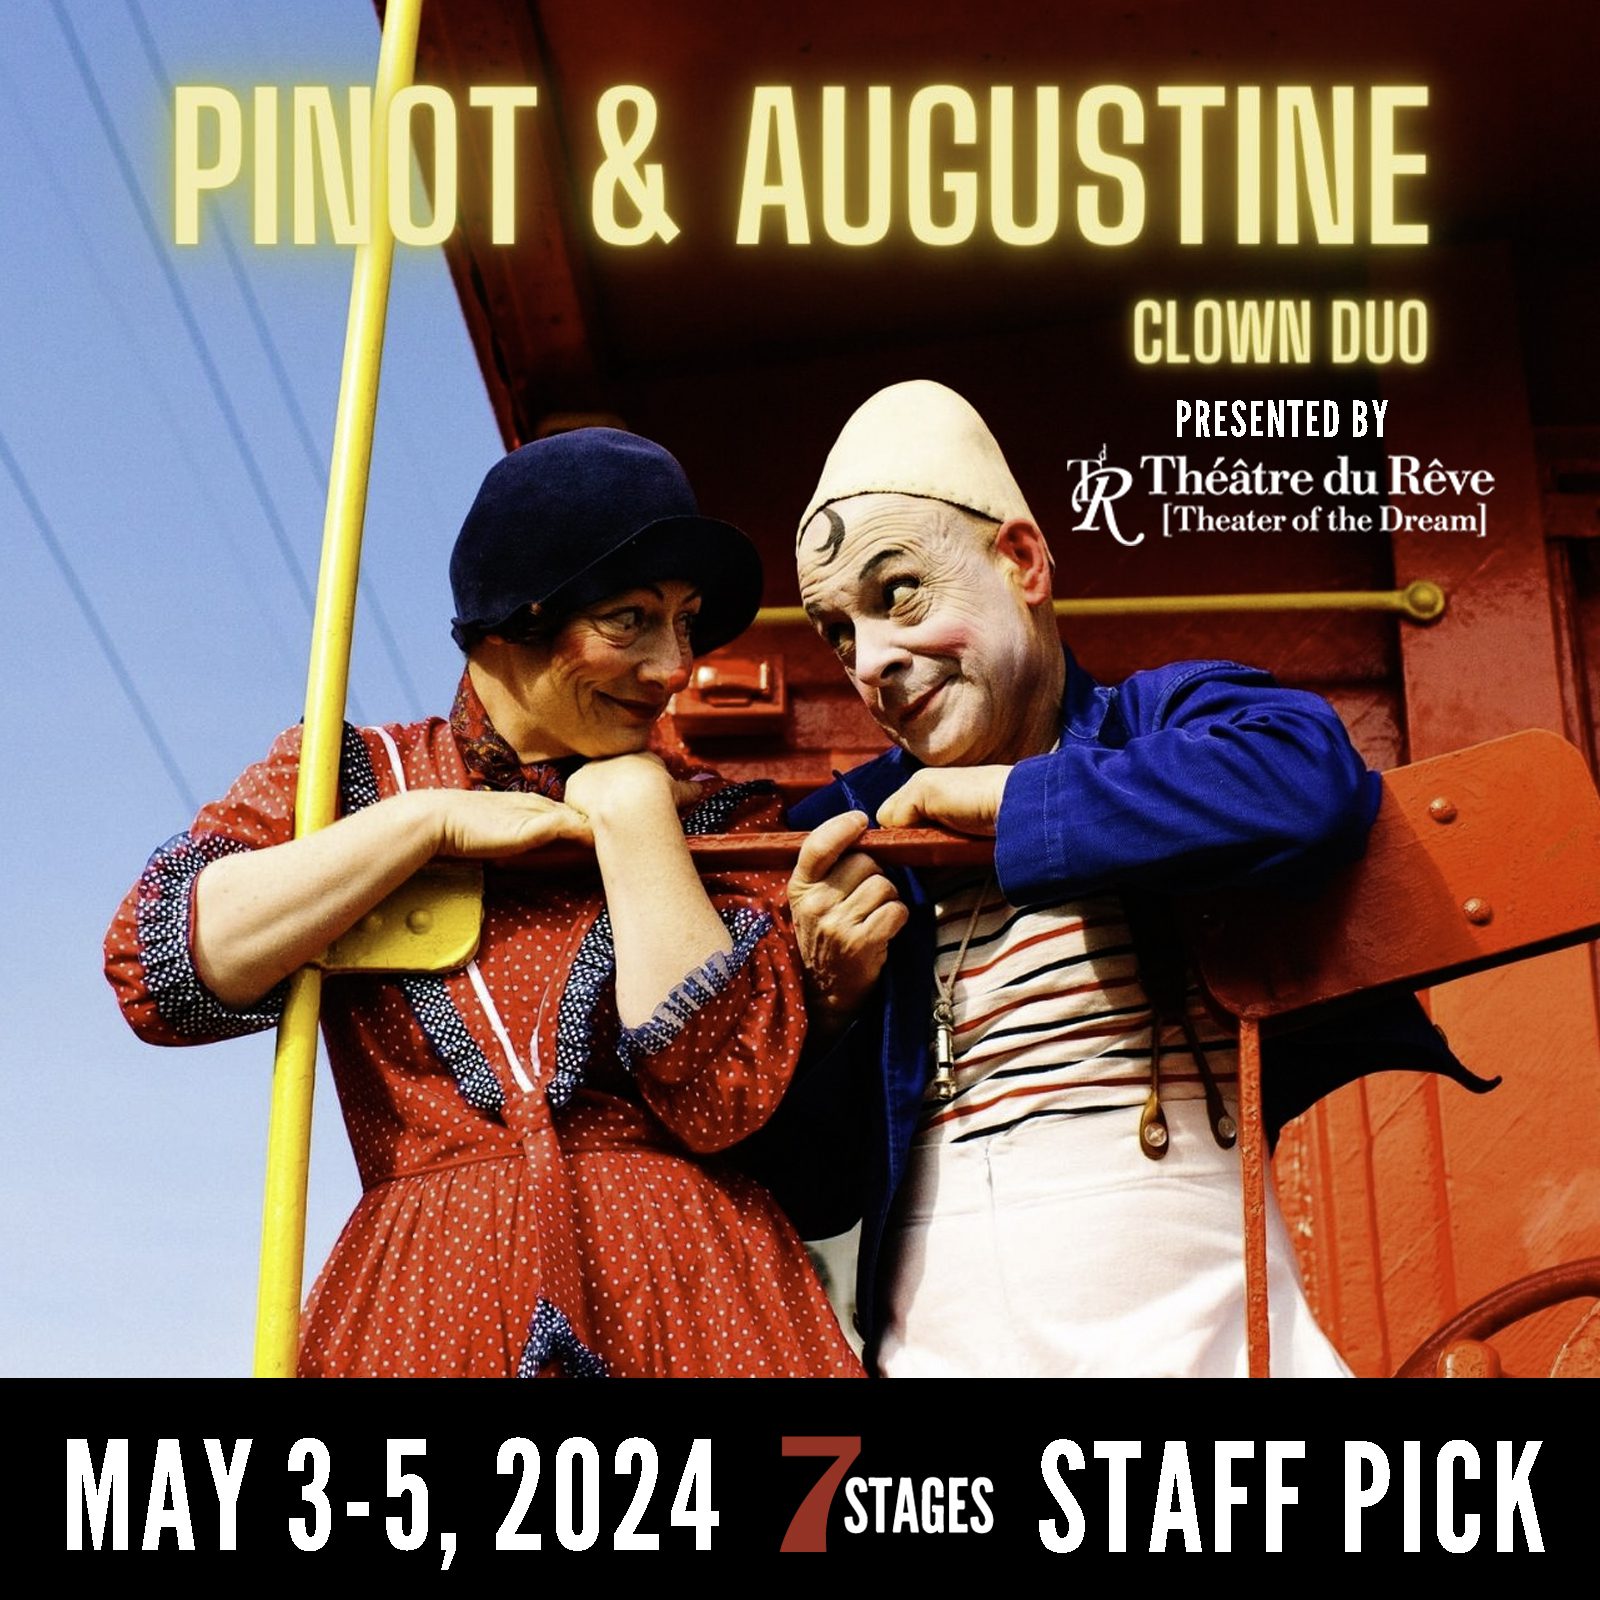 Pinot and Augustine presented by Theare du Reve. May 3-5, 2024. 7 Stages Staff Pick.